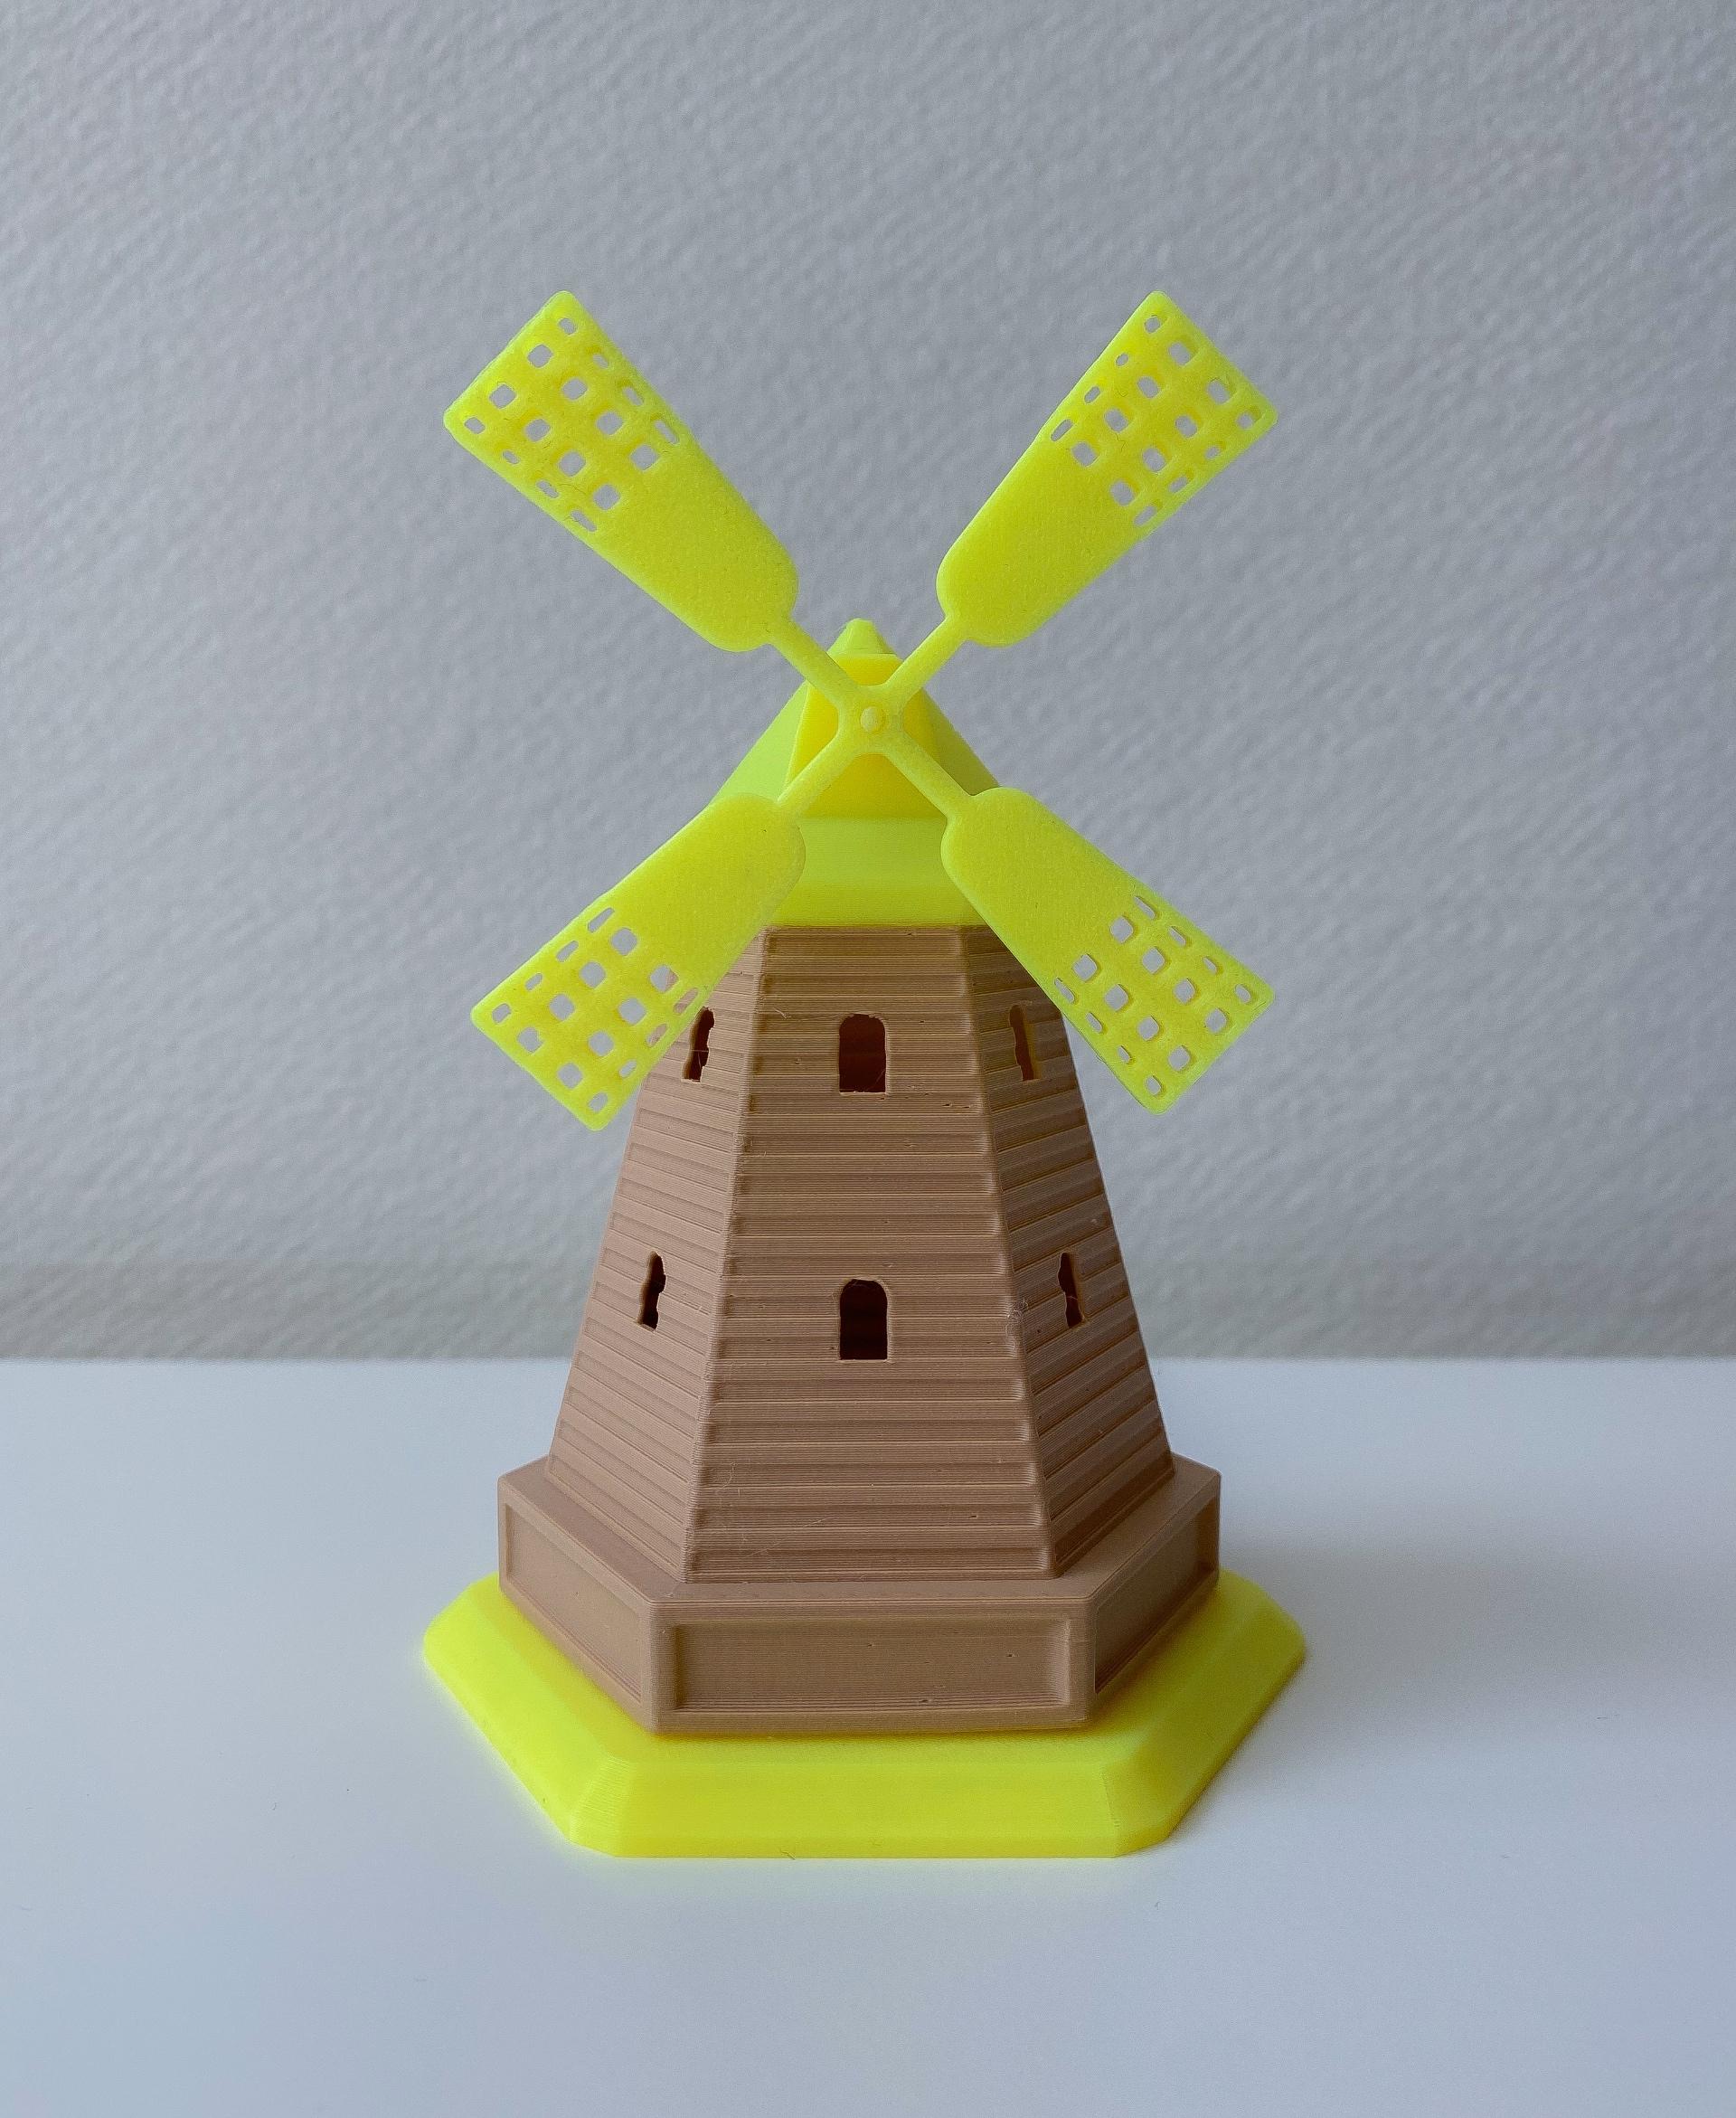 Windmill 7.8 - Cute windmill printed in 50%
Extrudr & Polymaker filament - 3d model